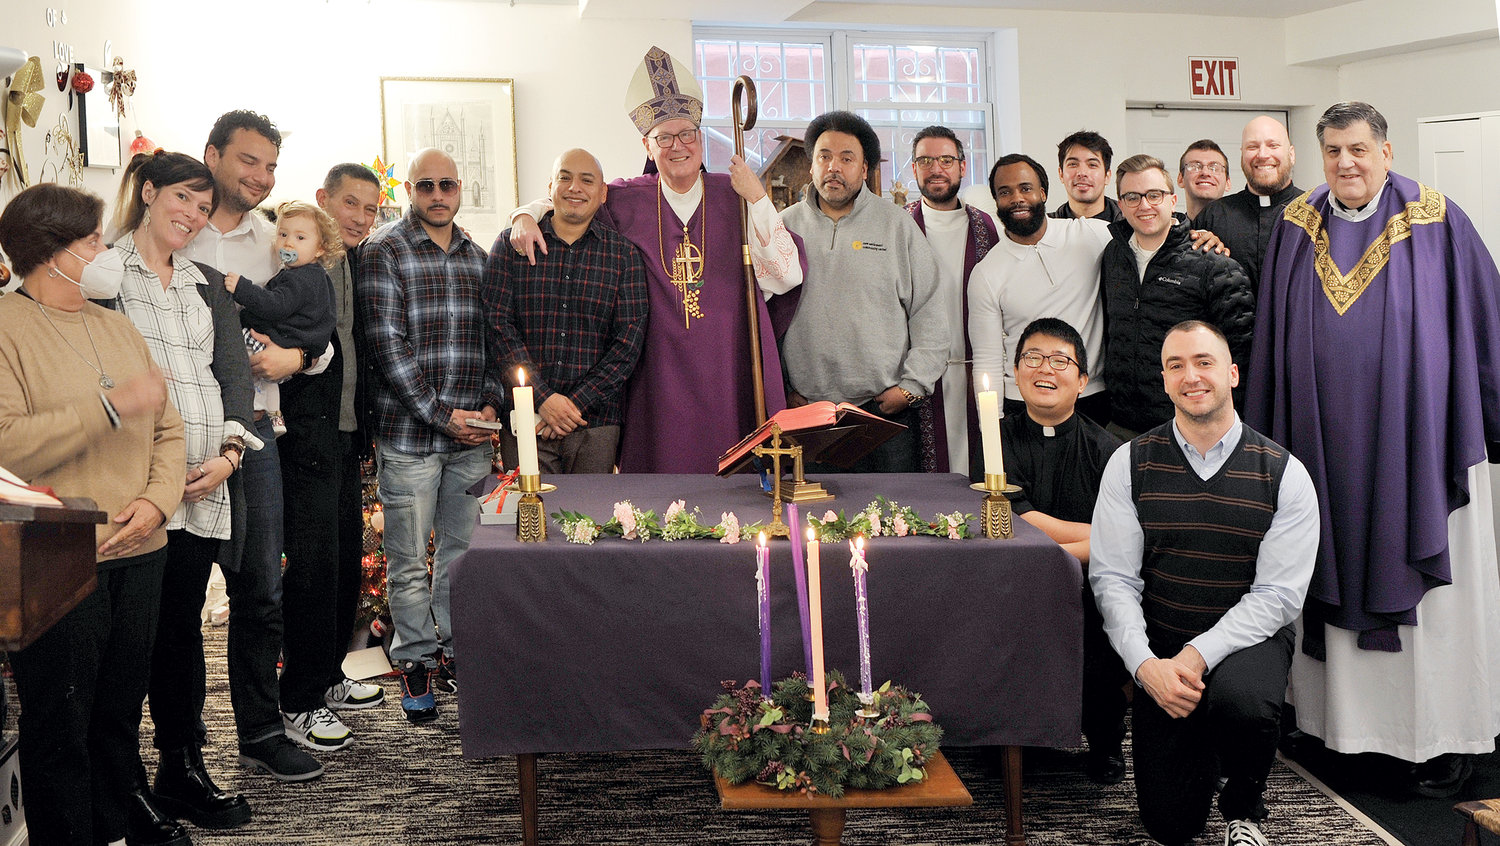 JOYFUL VISIT—Cardinal Dolan joins the men and staff of Ignacio House in the Bronx, where he offered Mass during a Dec. 15 visit. Ignacio House is a house of studies where formerly incarcerated men can continue their college education.